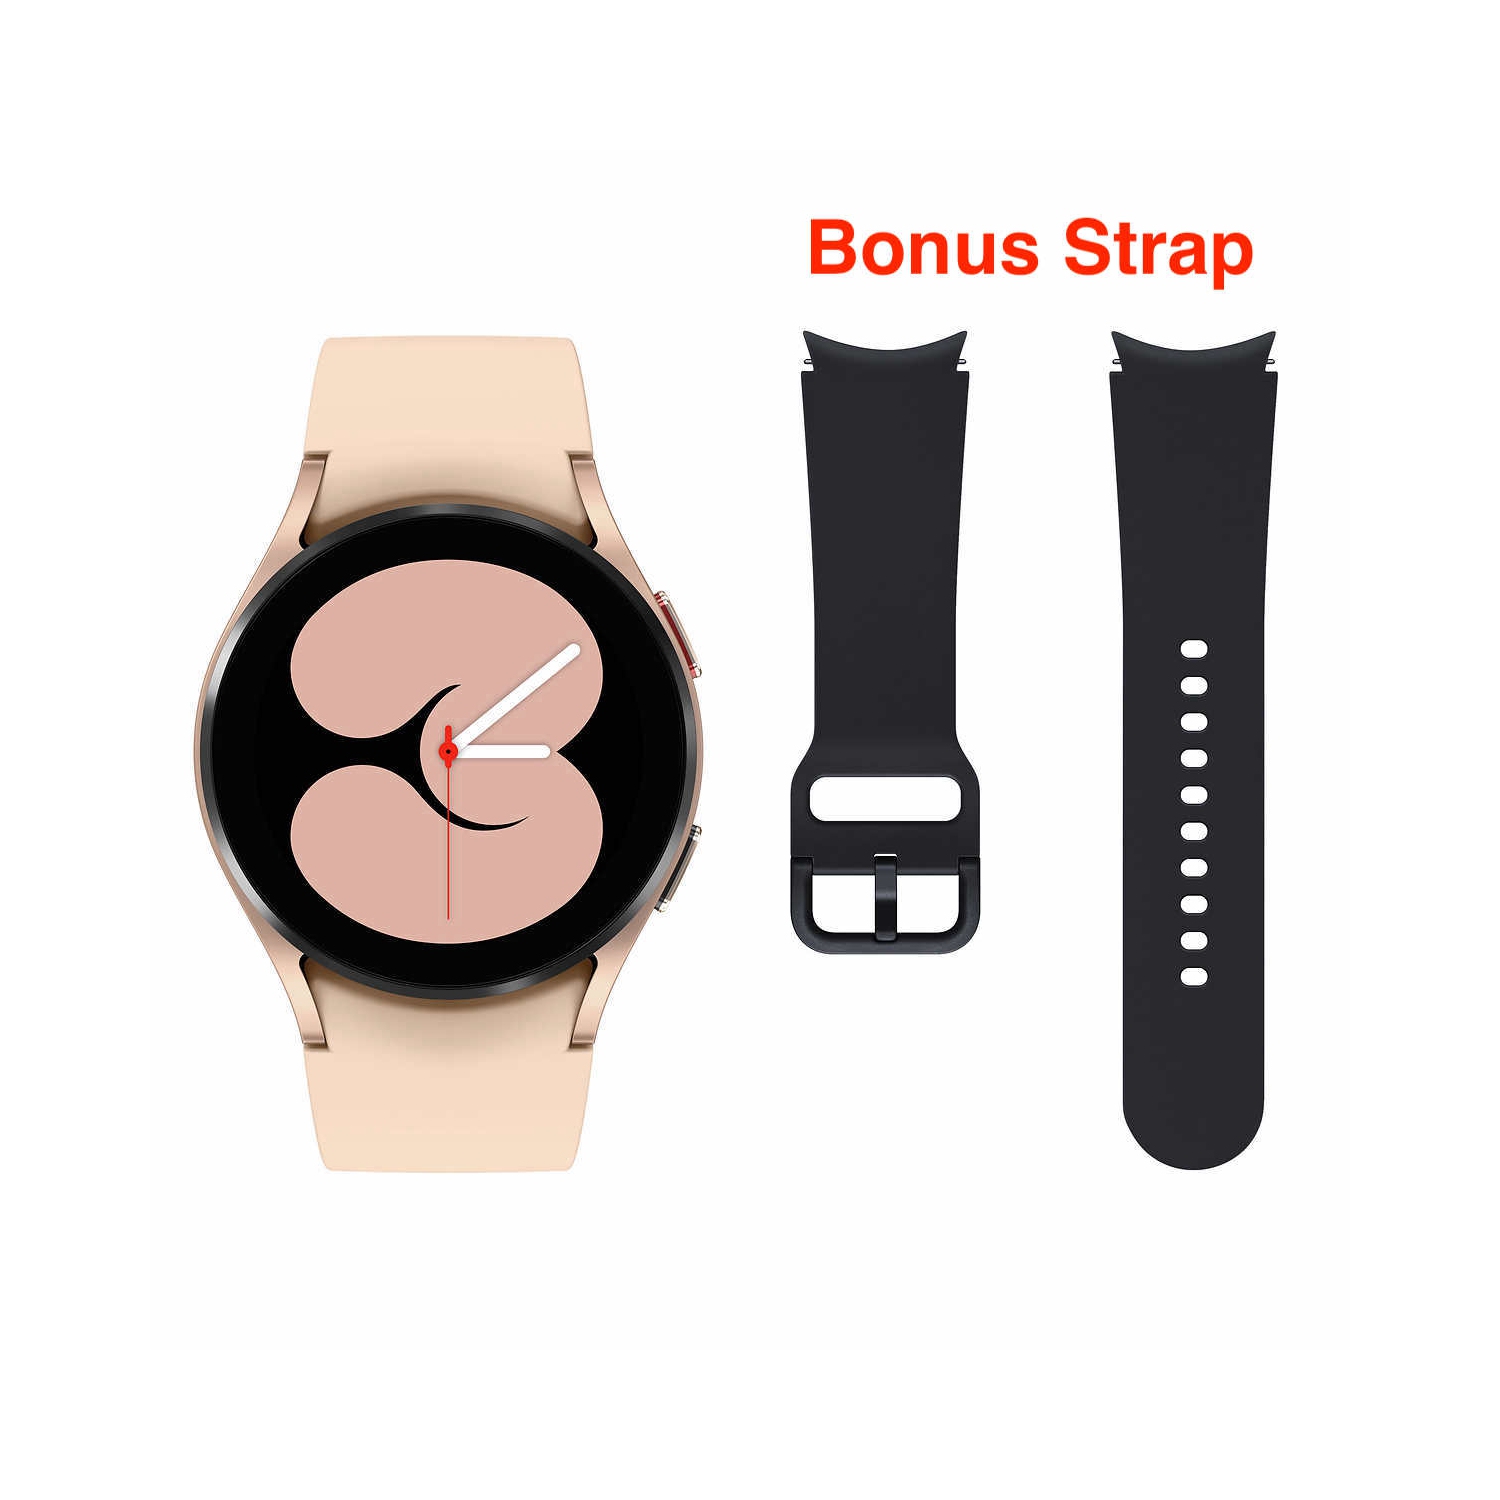 Samsung Galaxy Watch 4 40mm Smartwatch with Heart Rate Monitor ( Includes additional strap in black ) - Pink Gold - Open Box